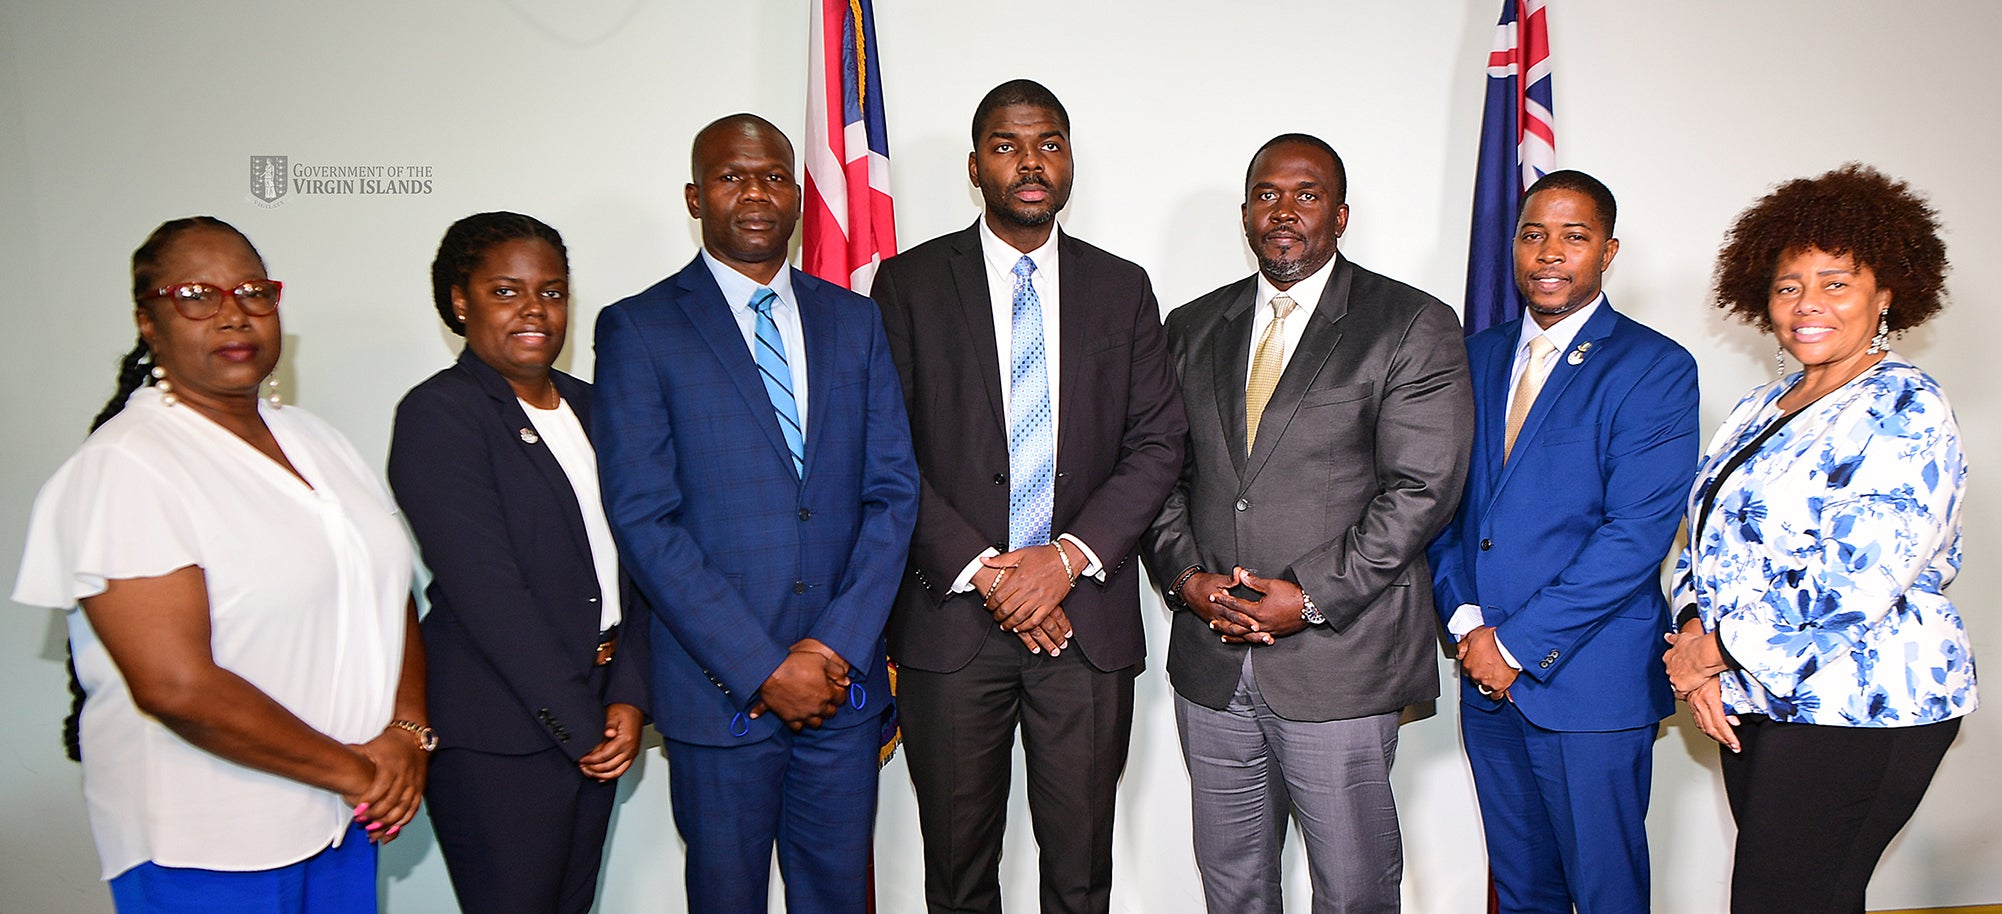 Acting premier Natalio Wheatley and colleagues